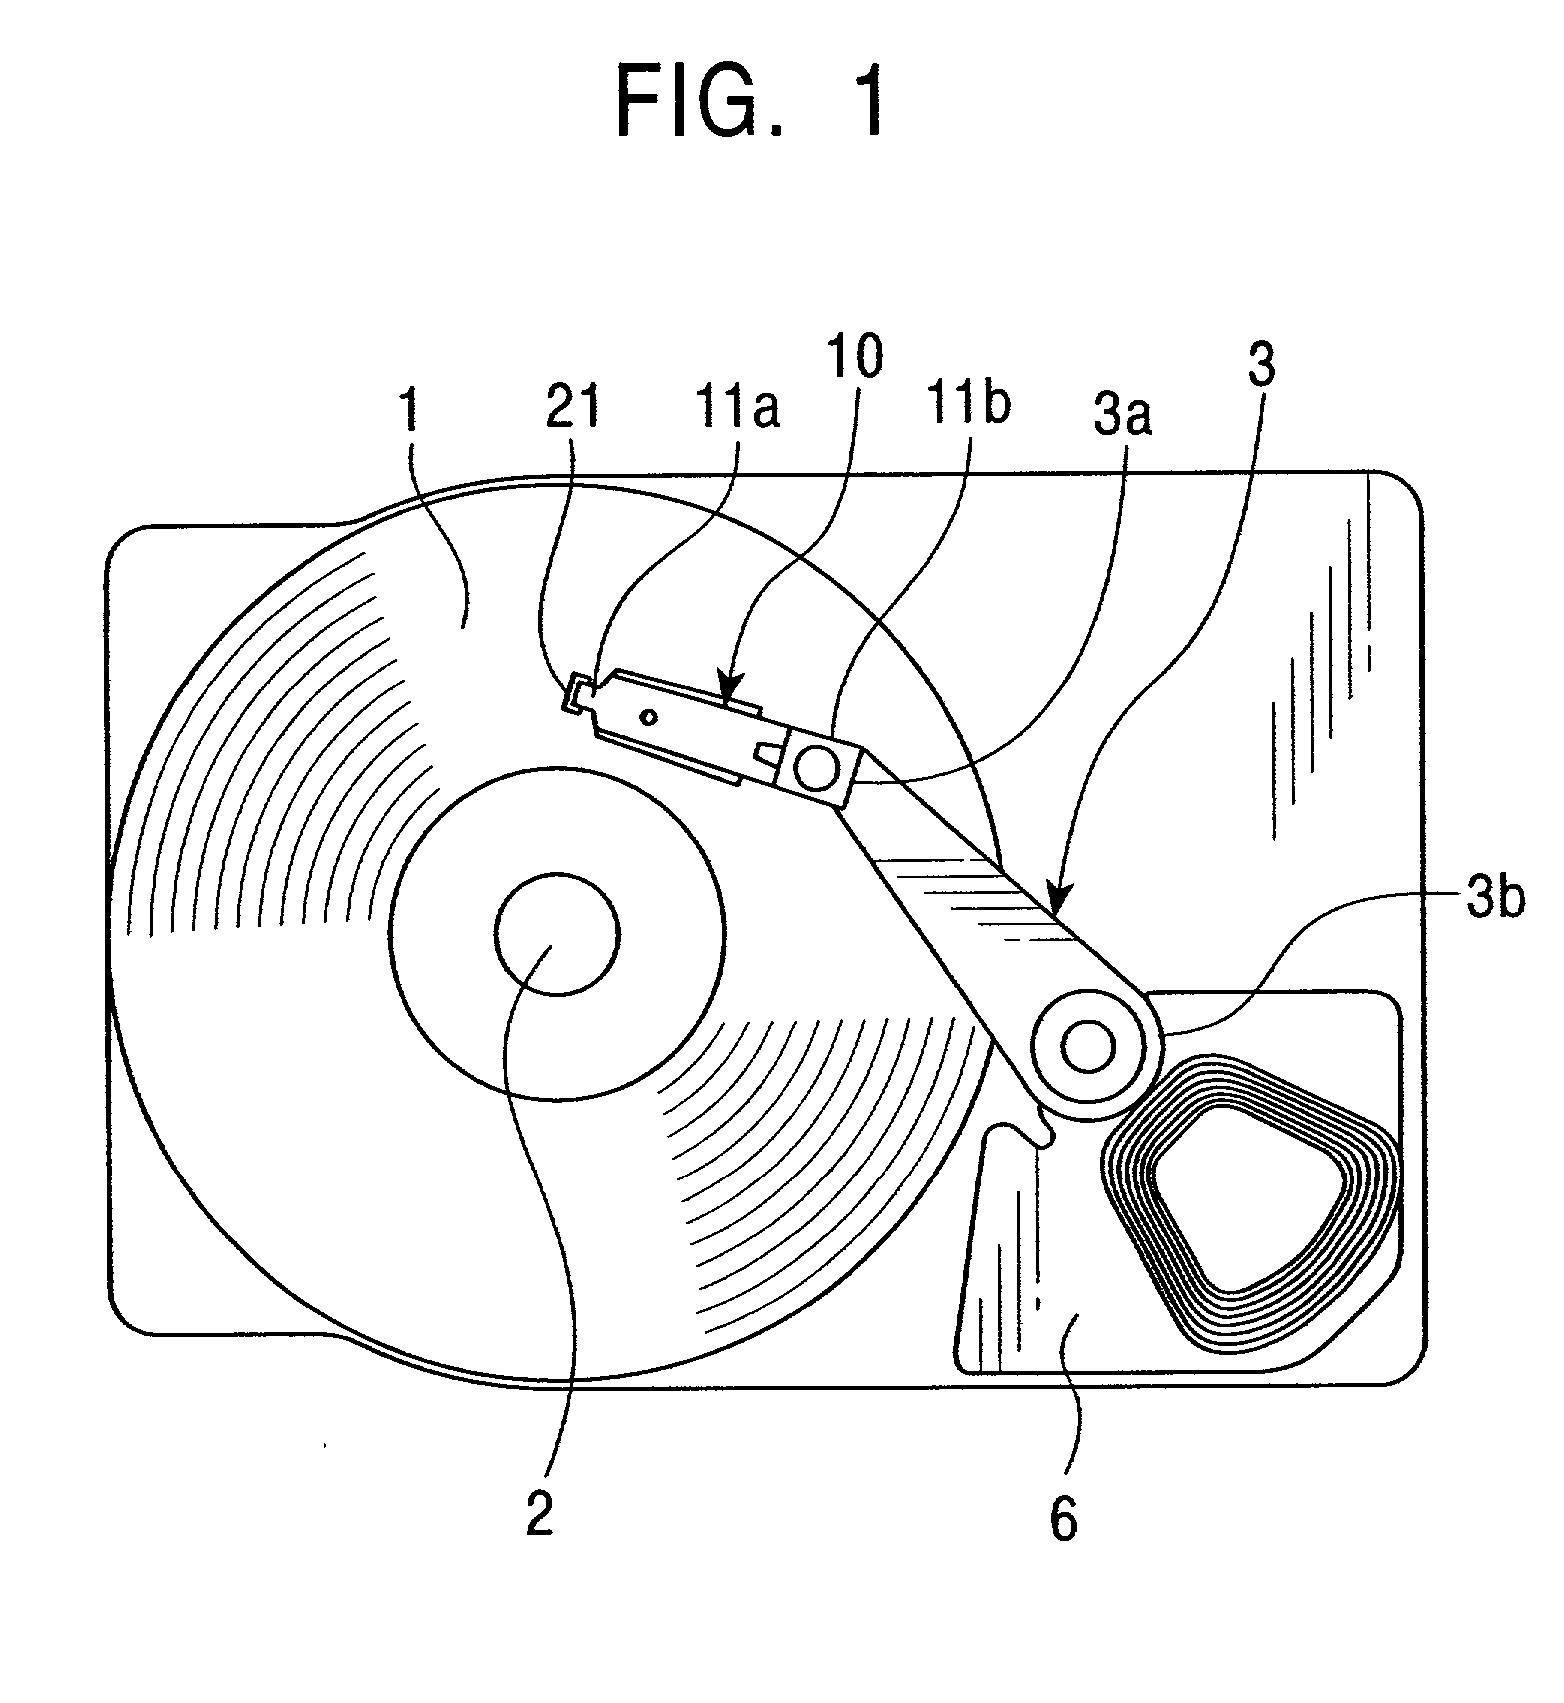 Magnetic head device having suspension with microactuator bonded thereto